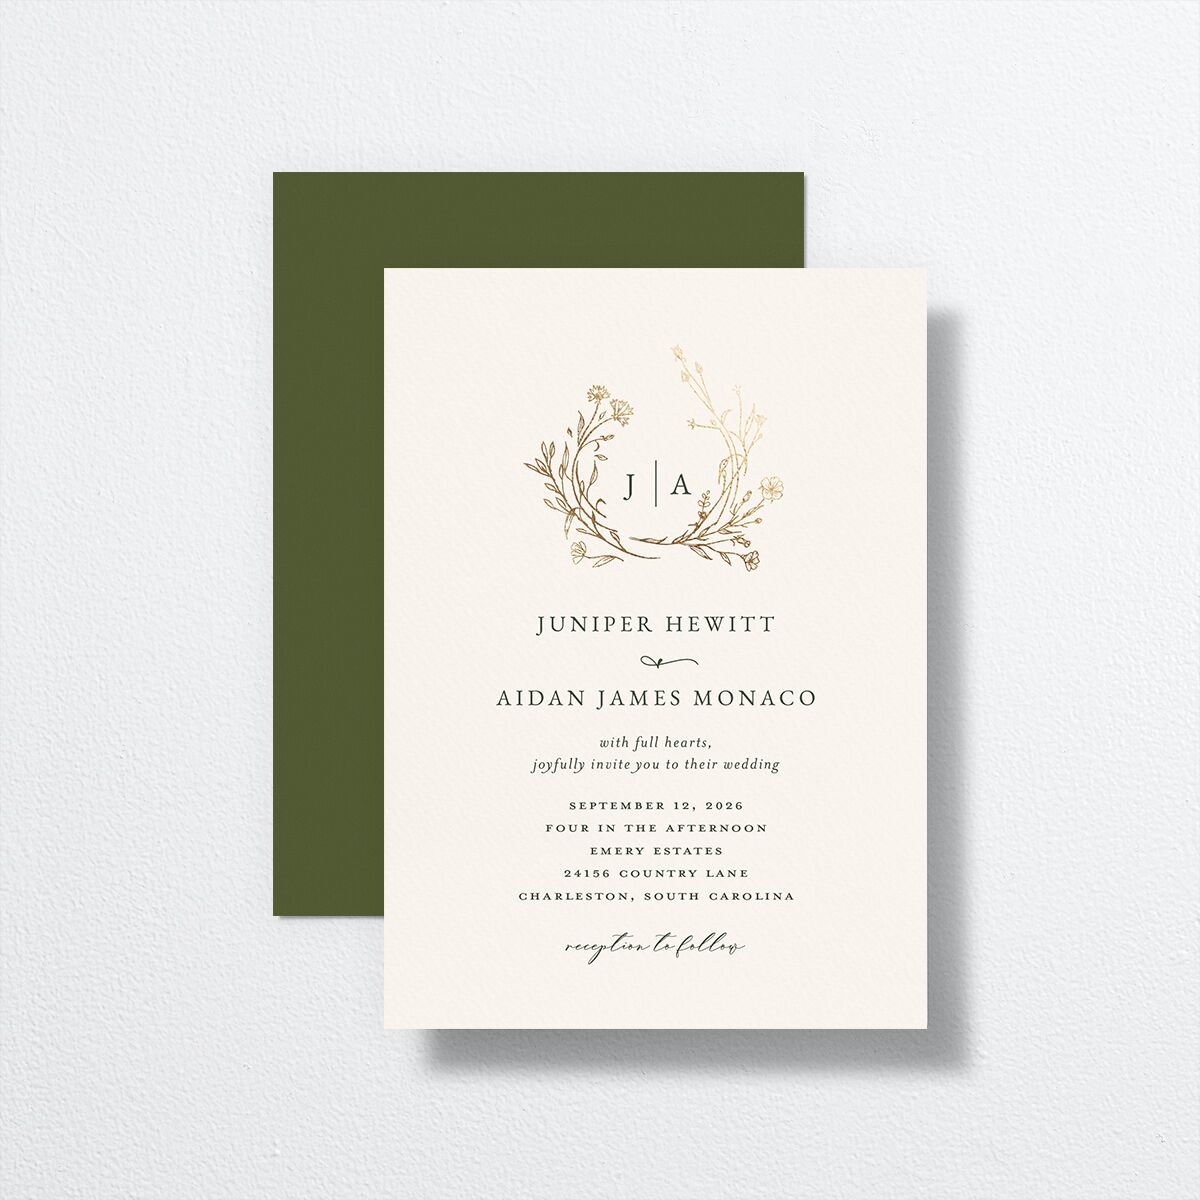 Gilded Monogram Wedding Invitations front-and-back